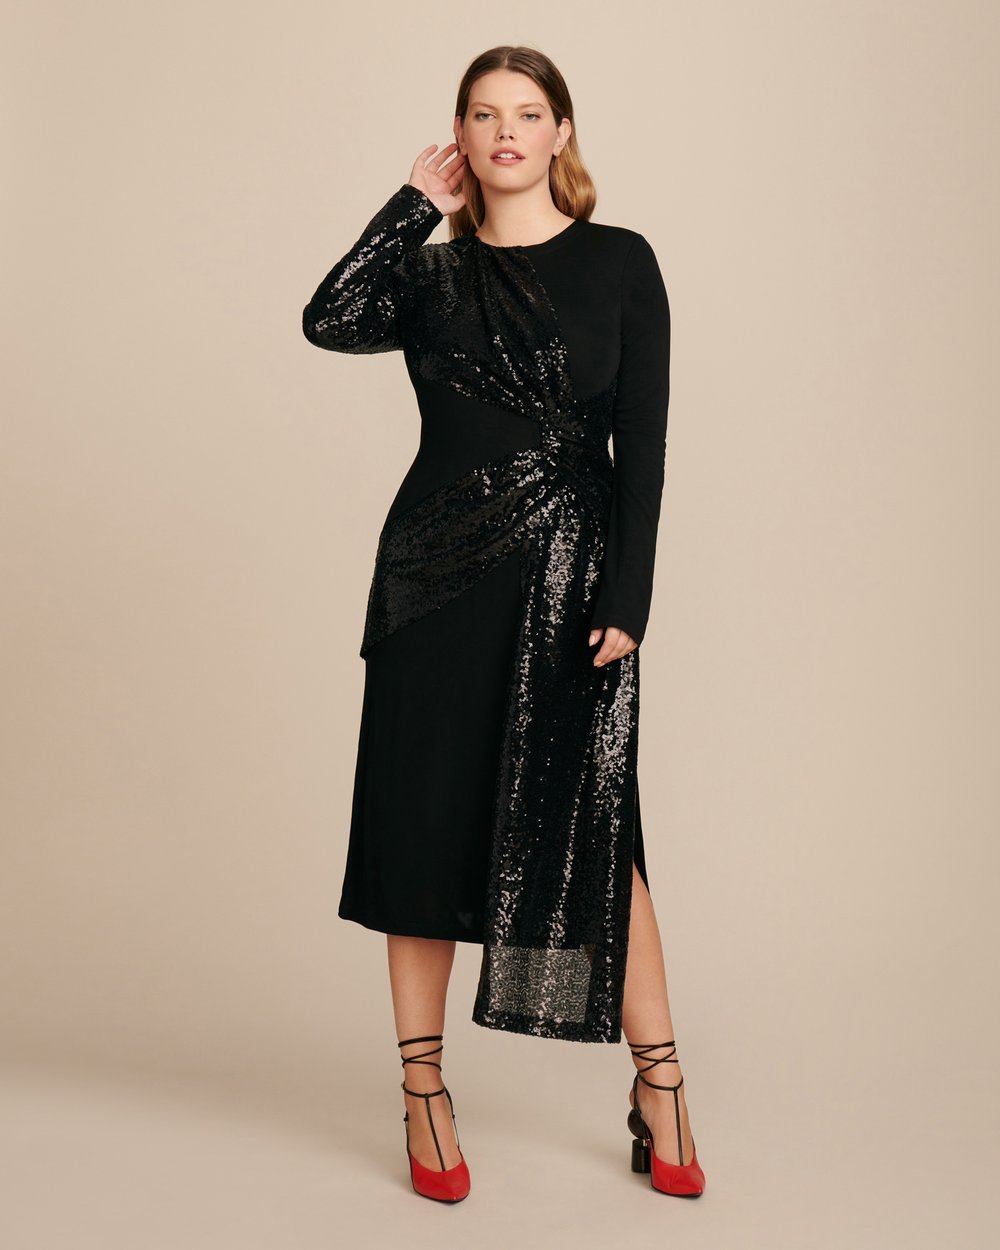 Luxury Plus SIze Fashion Finds at 11 Honore: PRABAL GURUNG Shilu Twist Front Plus Size Dress